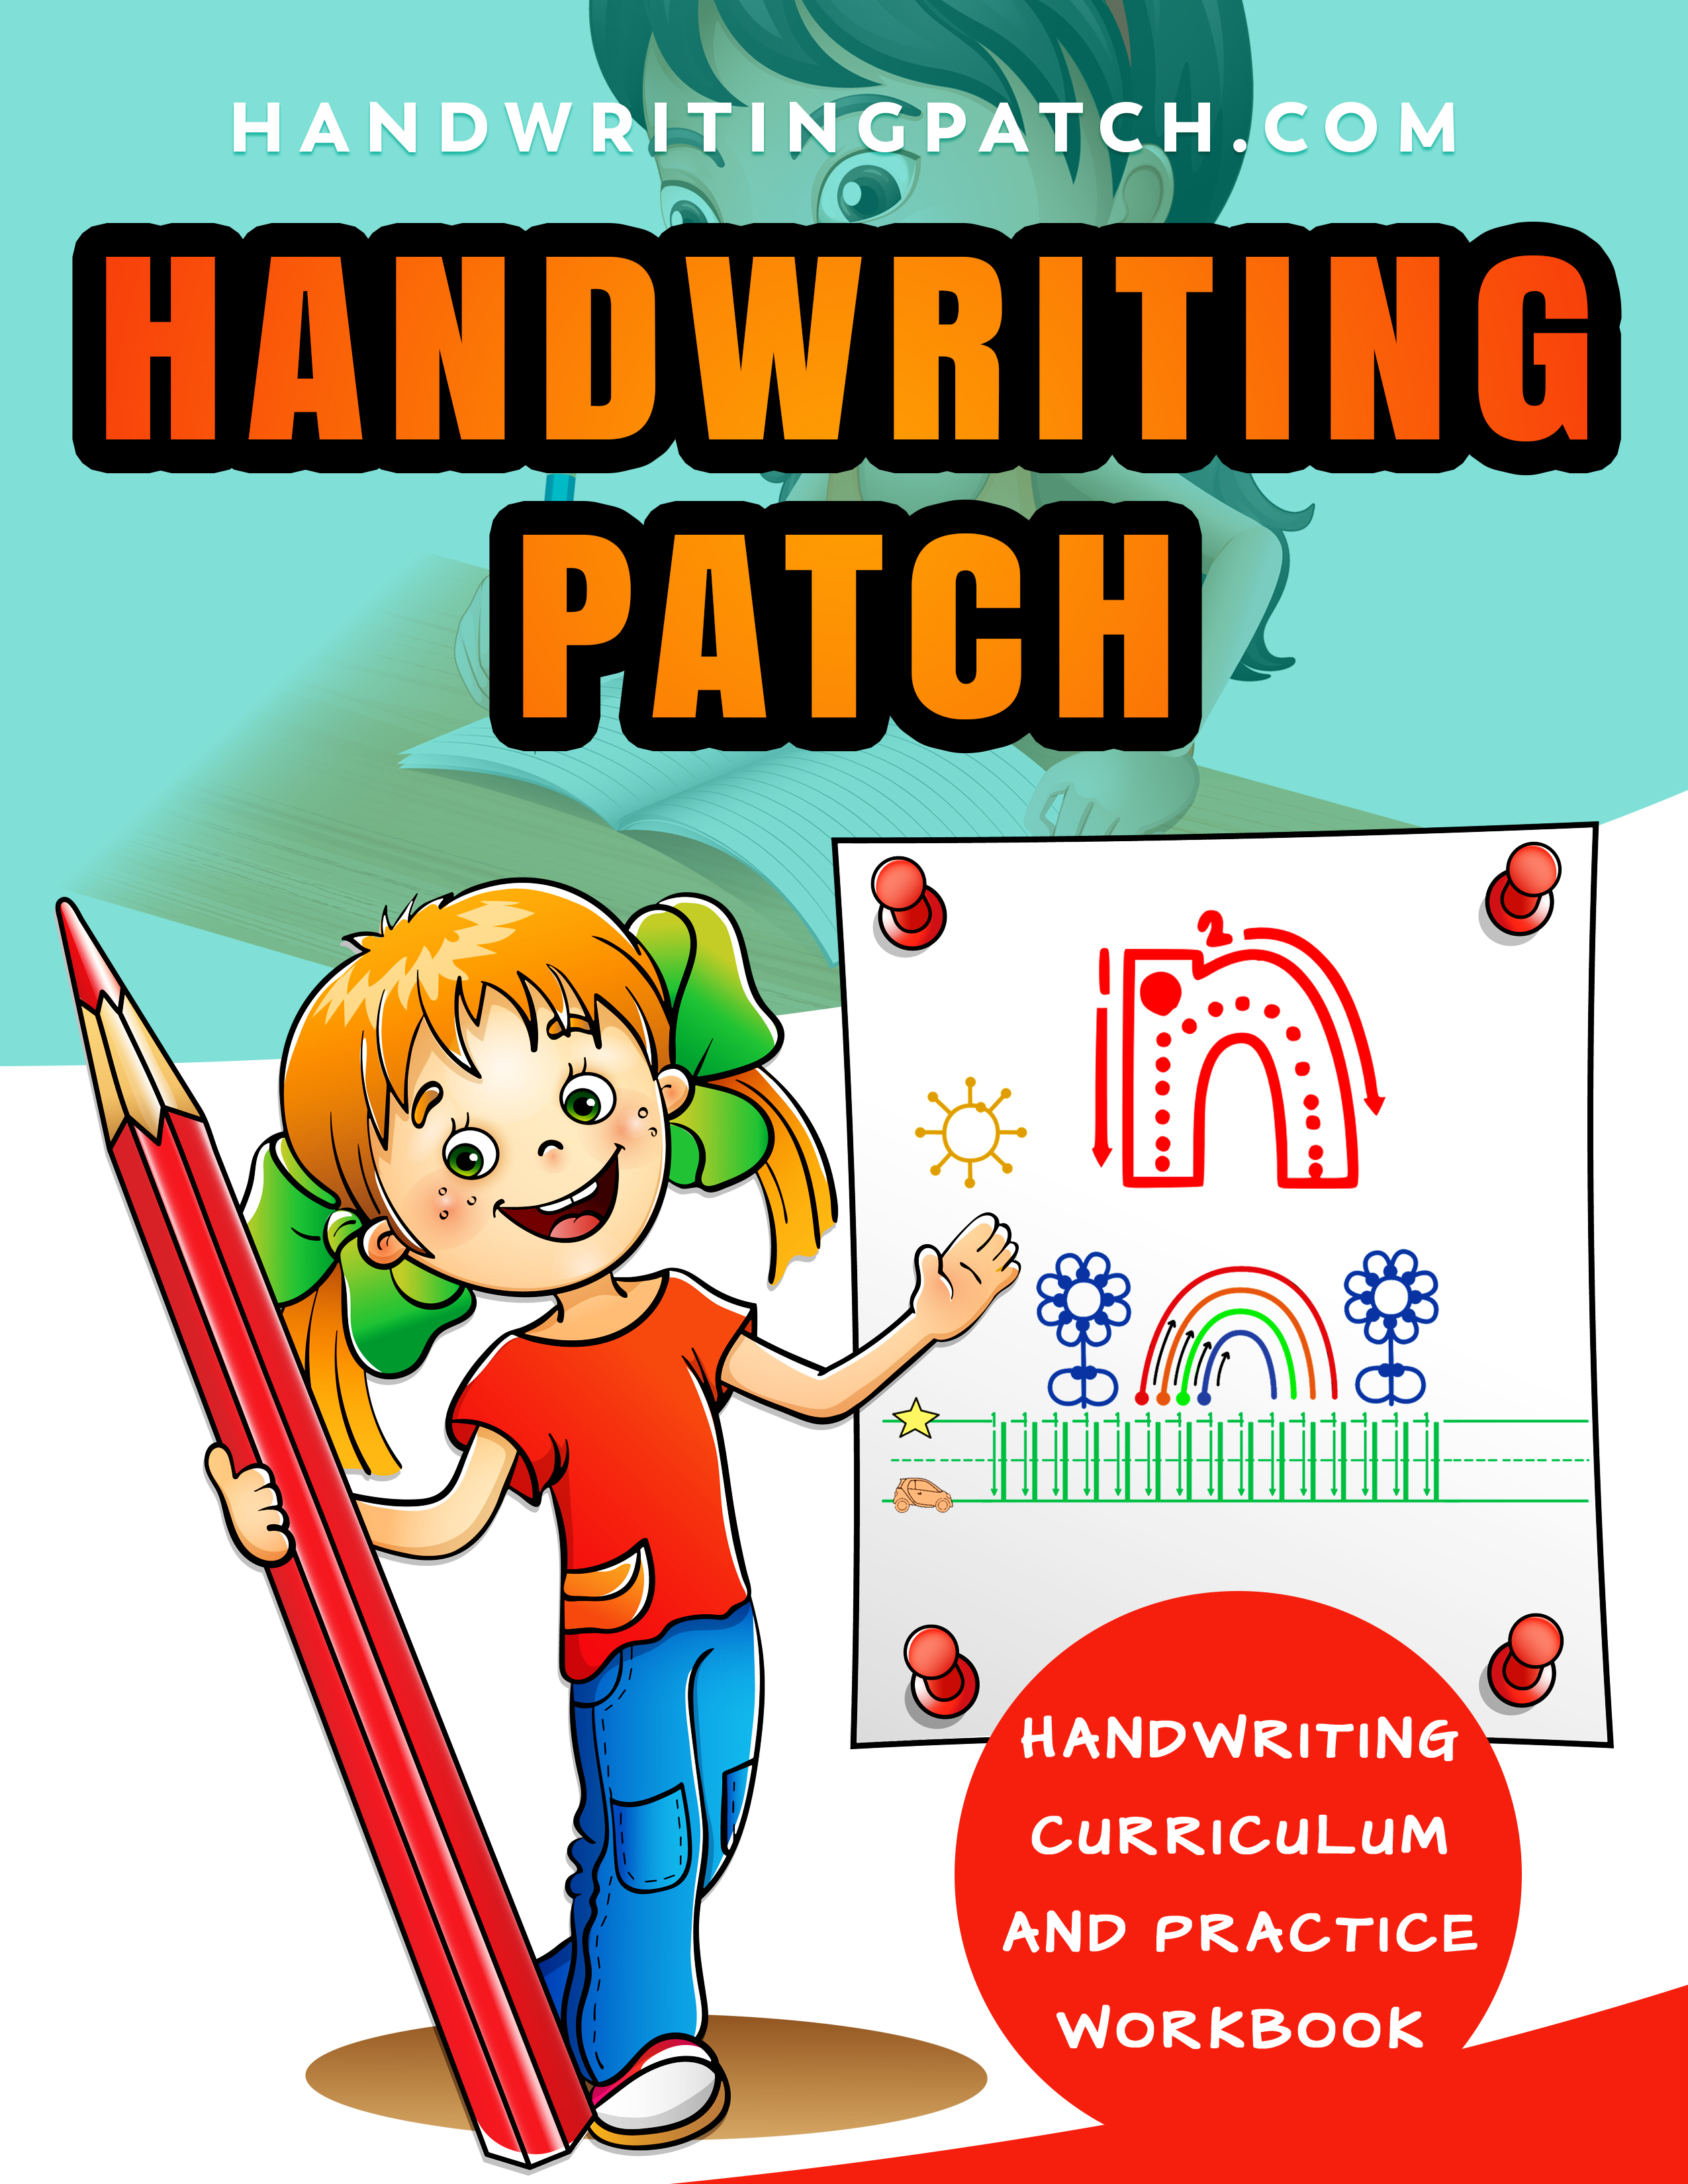 Handwriting Patch book cover